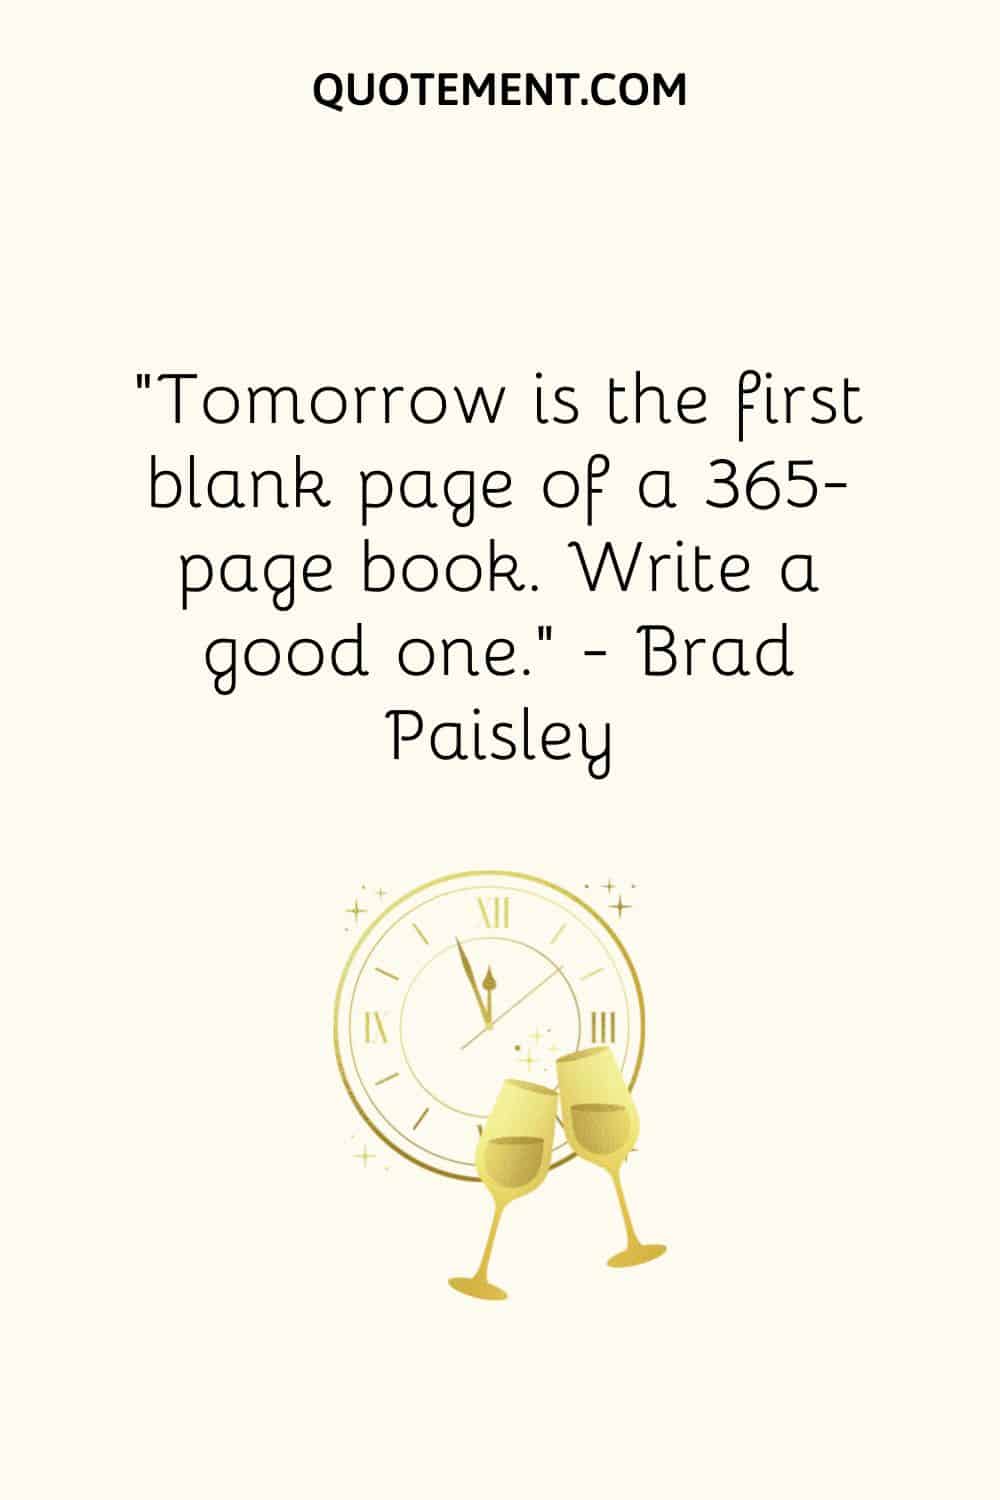 “Tomorrow is the first blank page of a 365-page book. Write a good one.” ― Brad Paisley